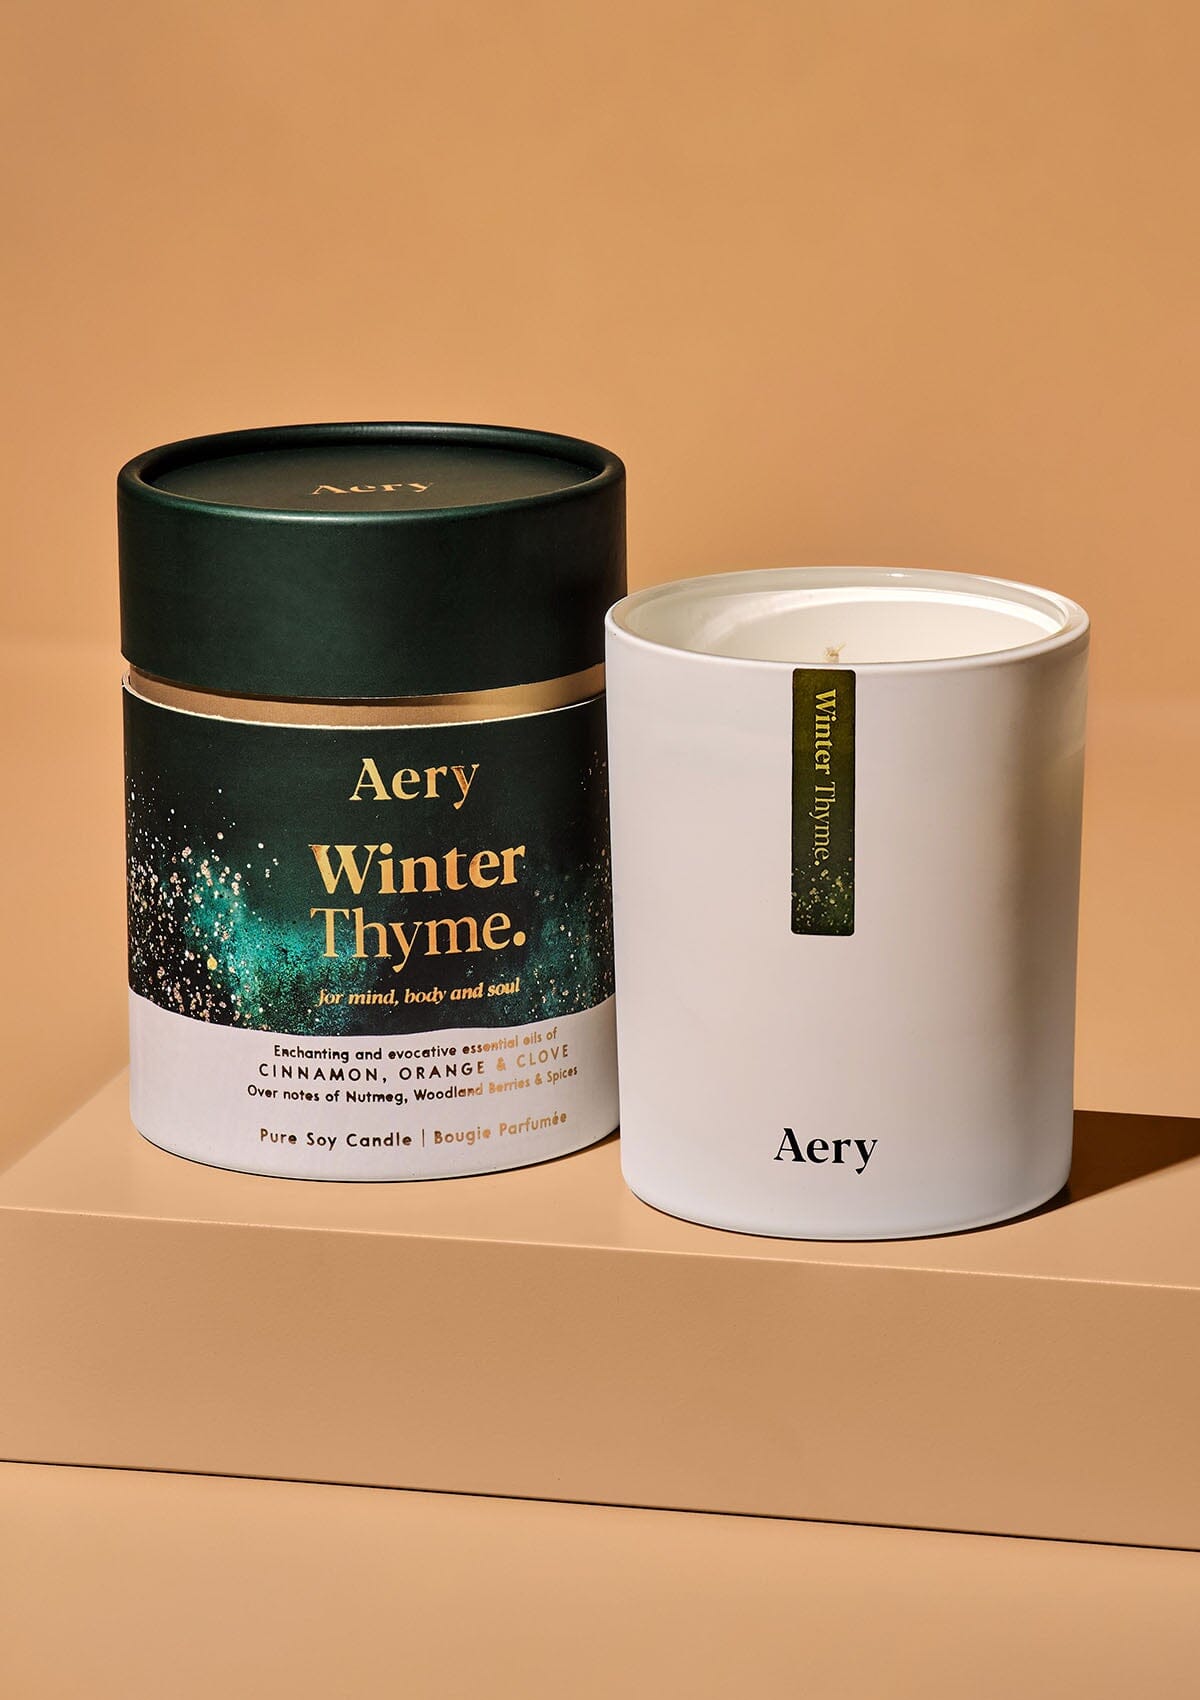 winter thyme scented candle displayed next to decorative product packaging